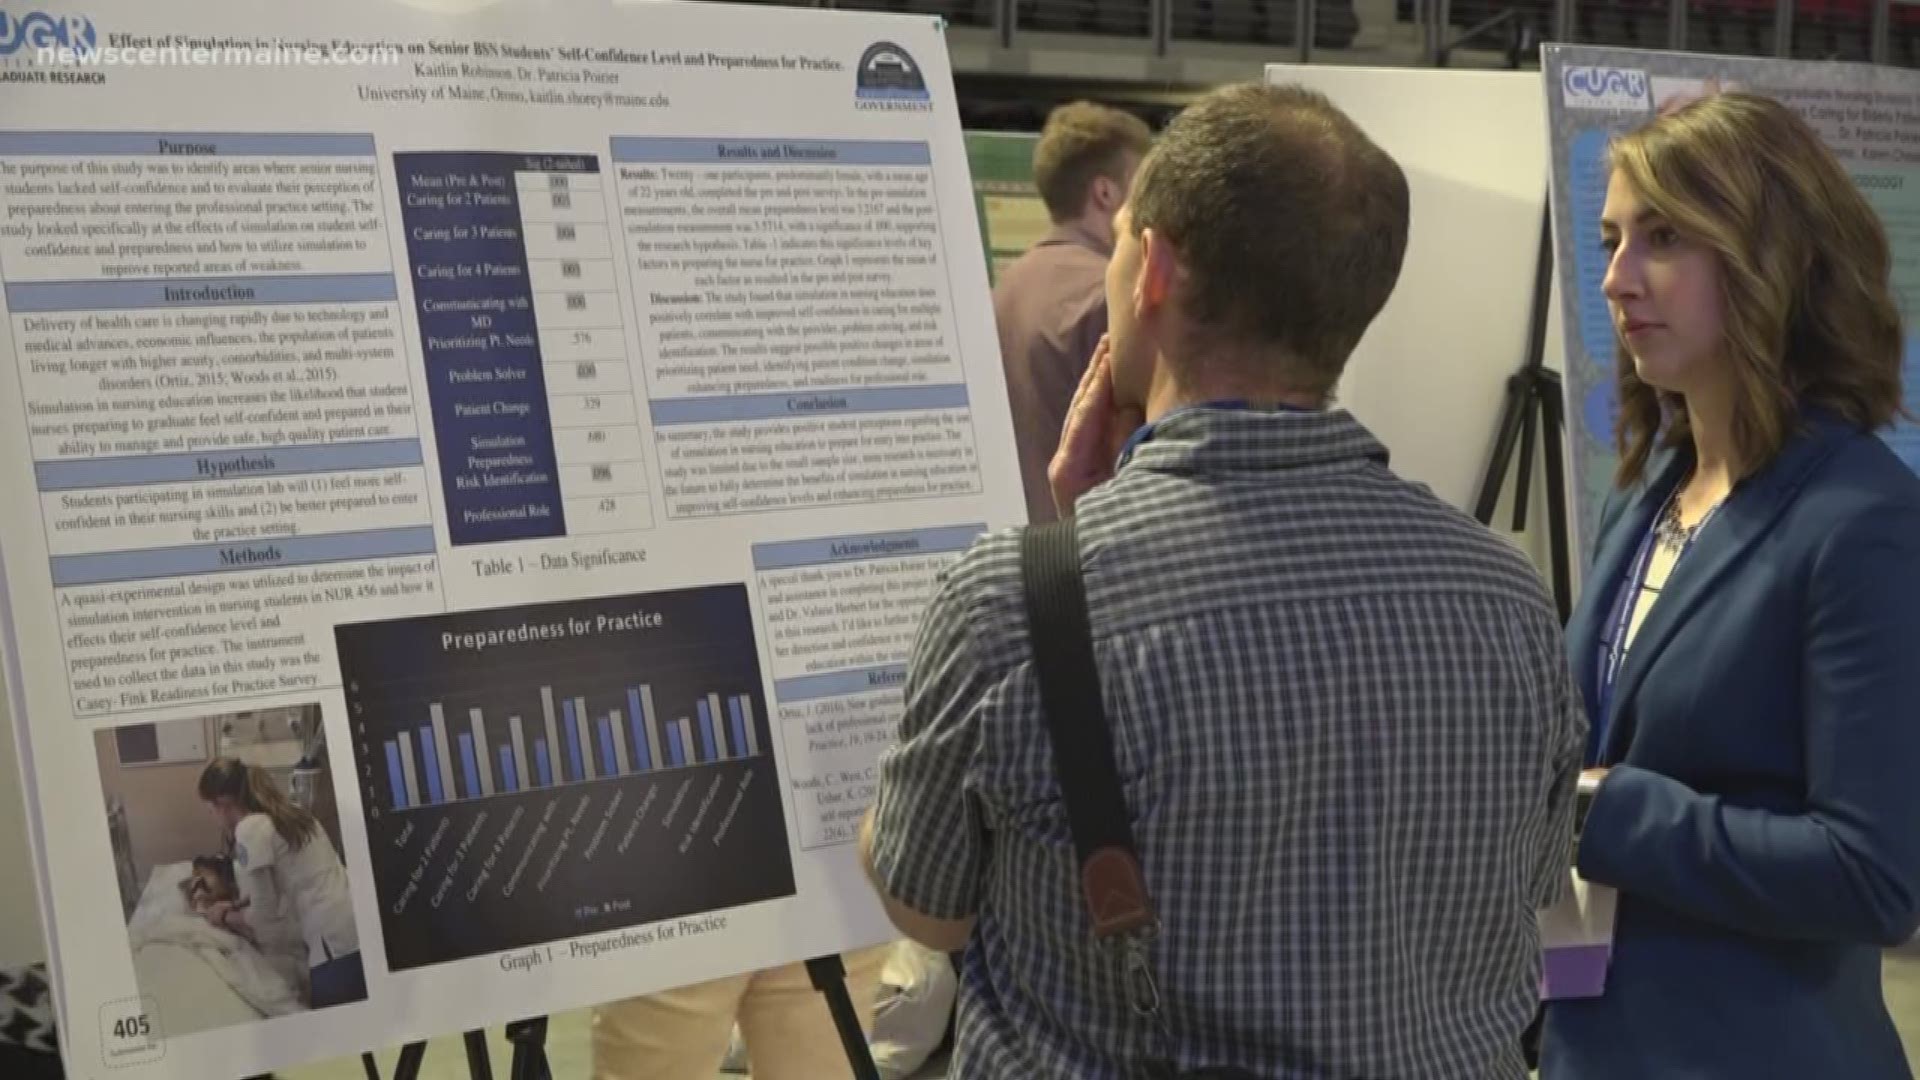 Students showed off their research at the UMaine Student Symposium on Wednesday.